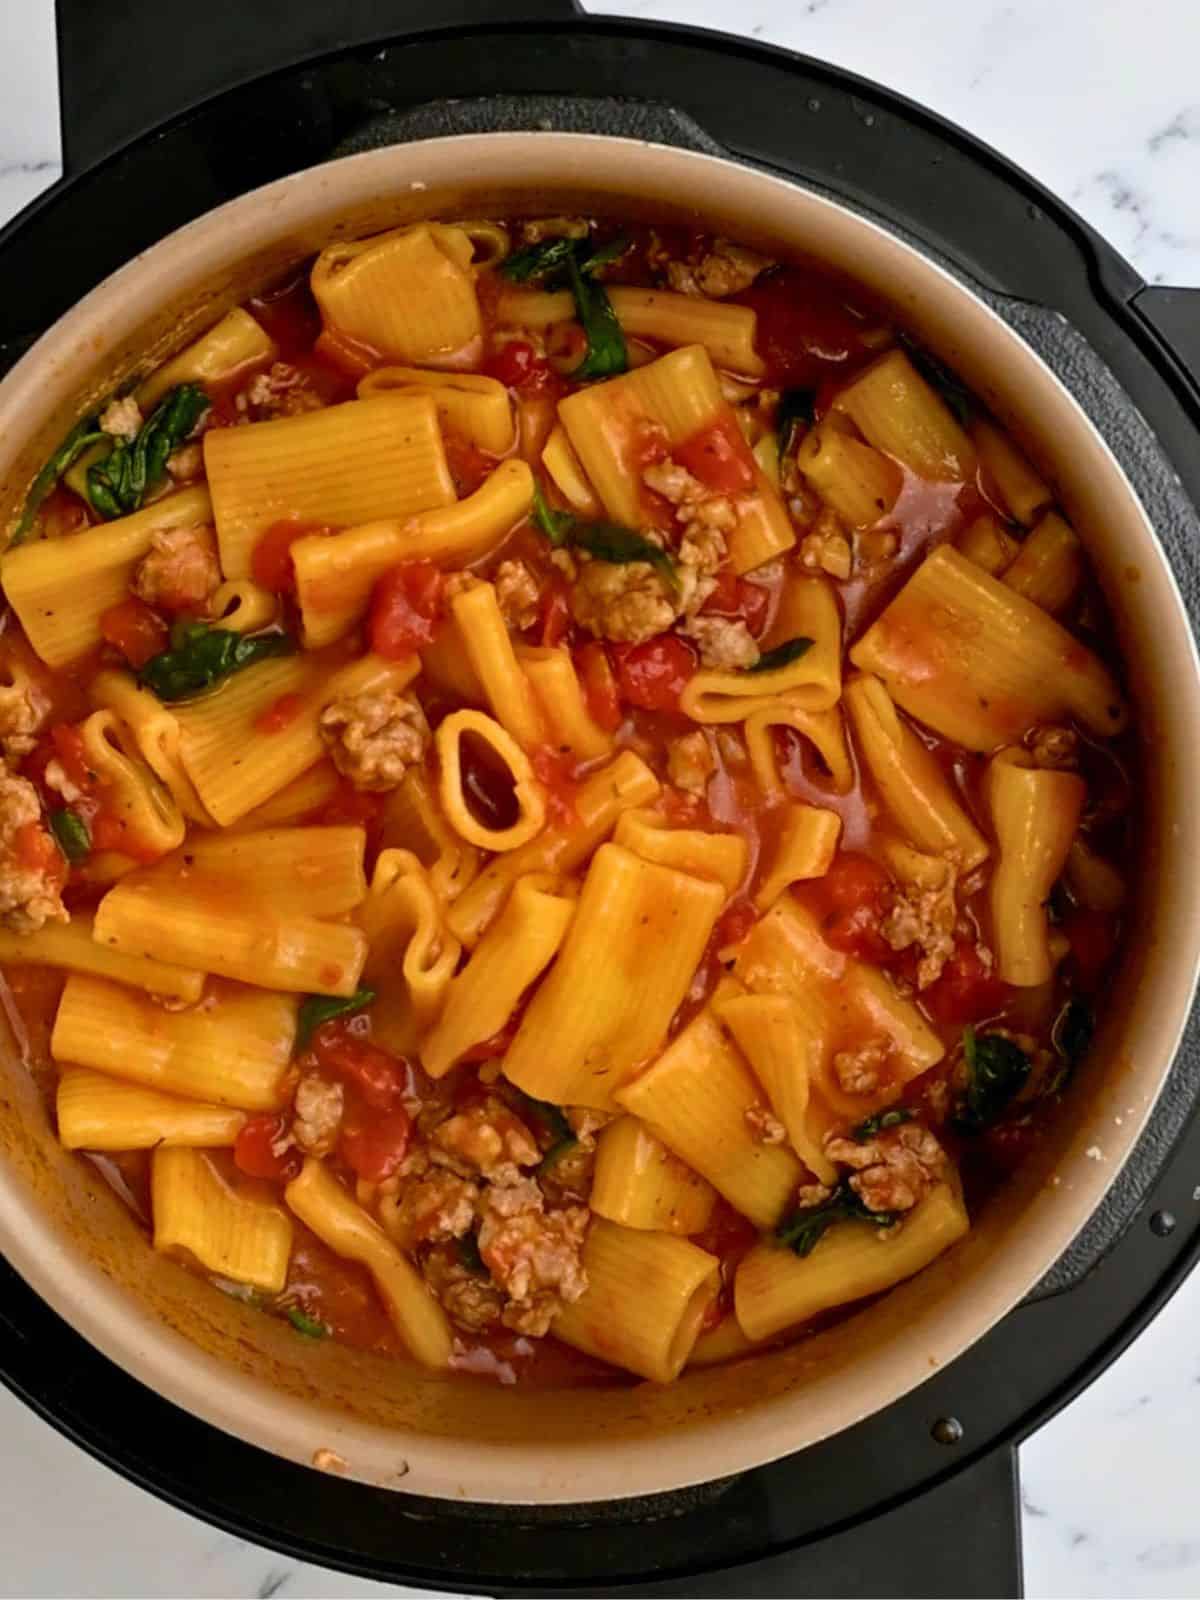 Instant Pot Filled with perfectly cooked rigatoni and sausage in a diced tomato sauce.